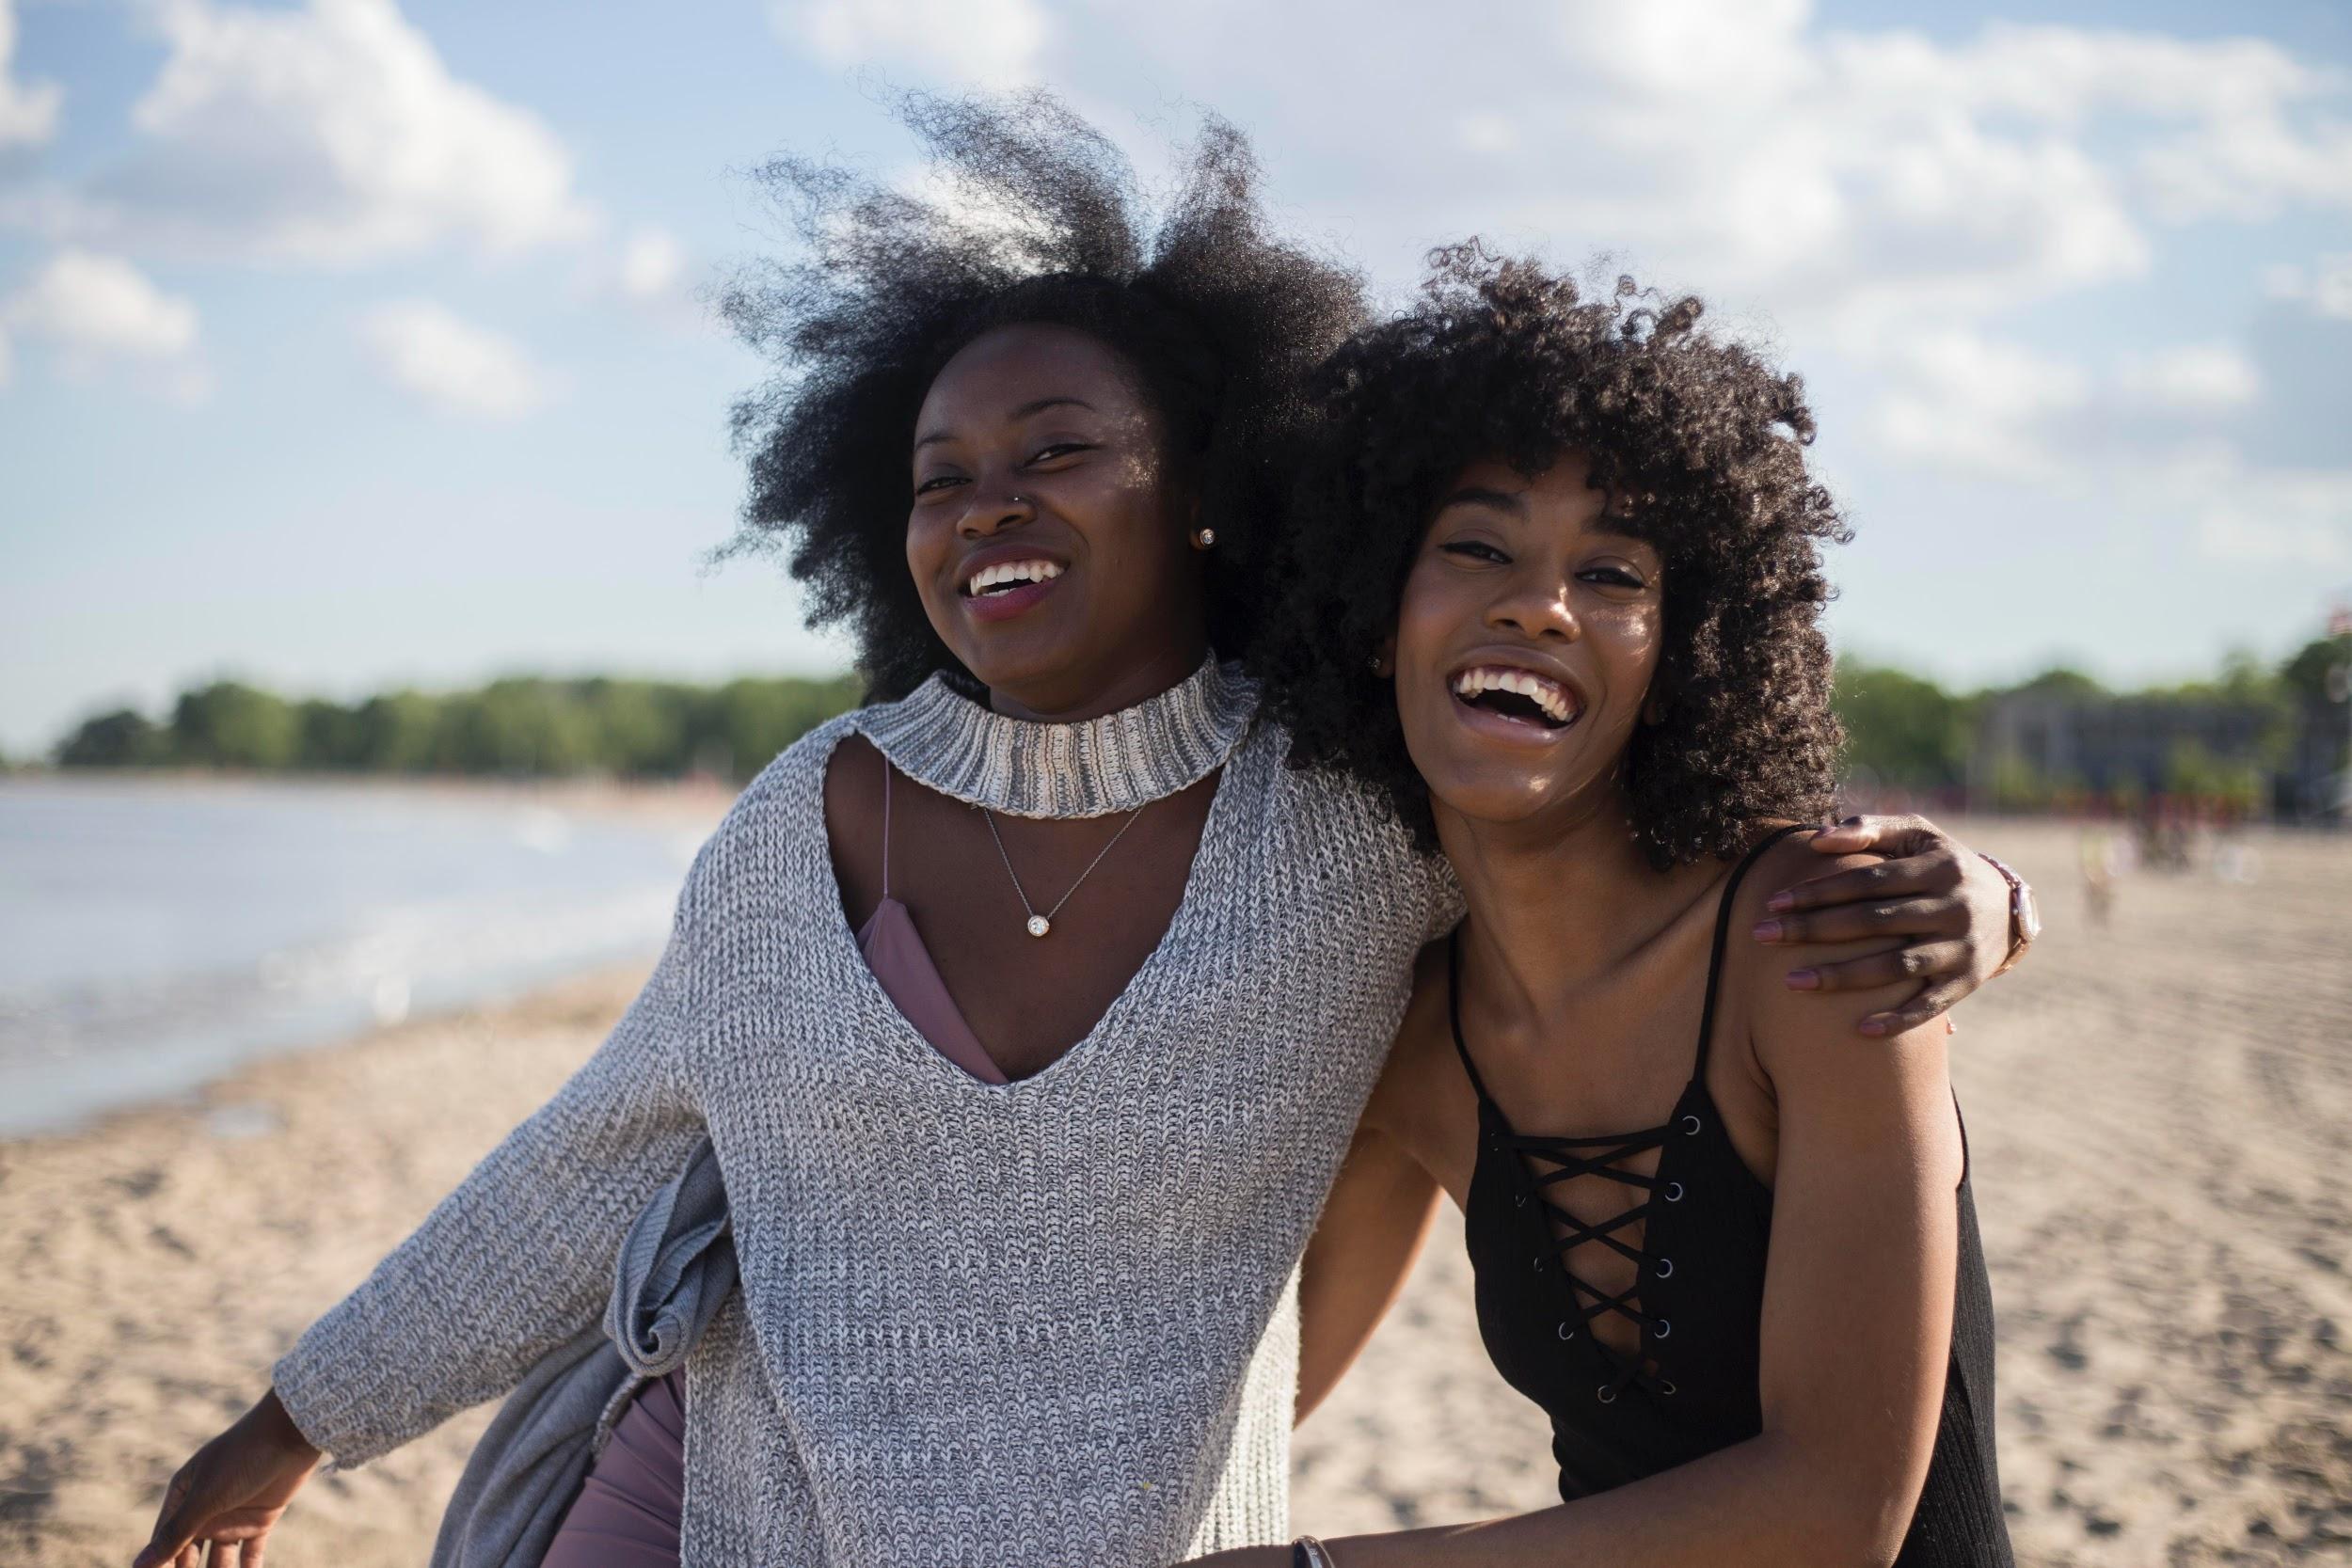 Two young black women smiling and hugging, while enjoying themselves on the beach.